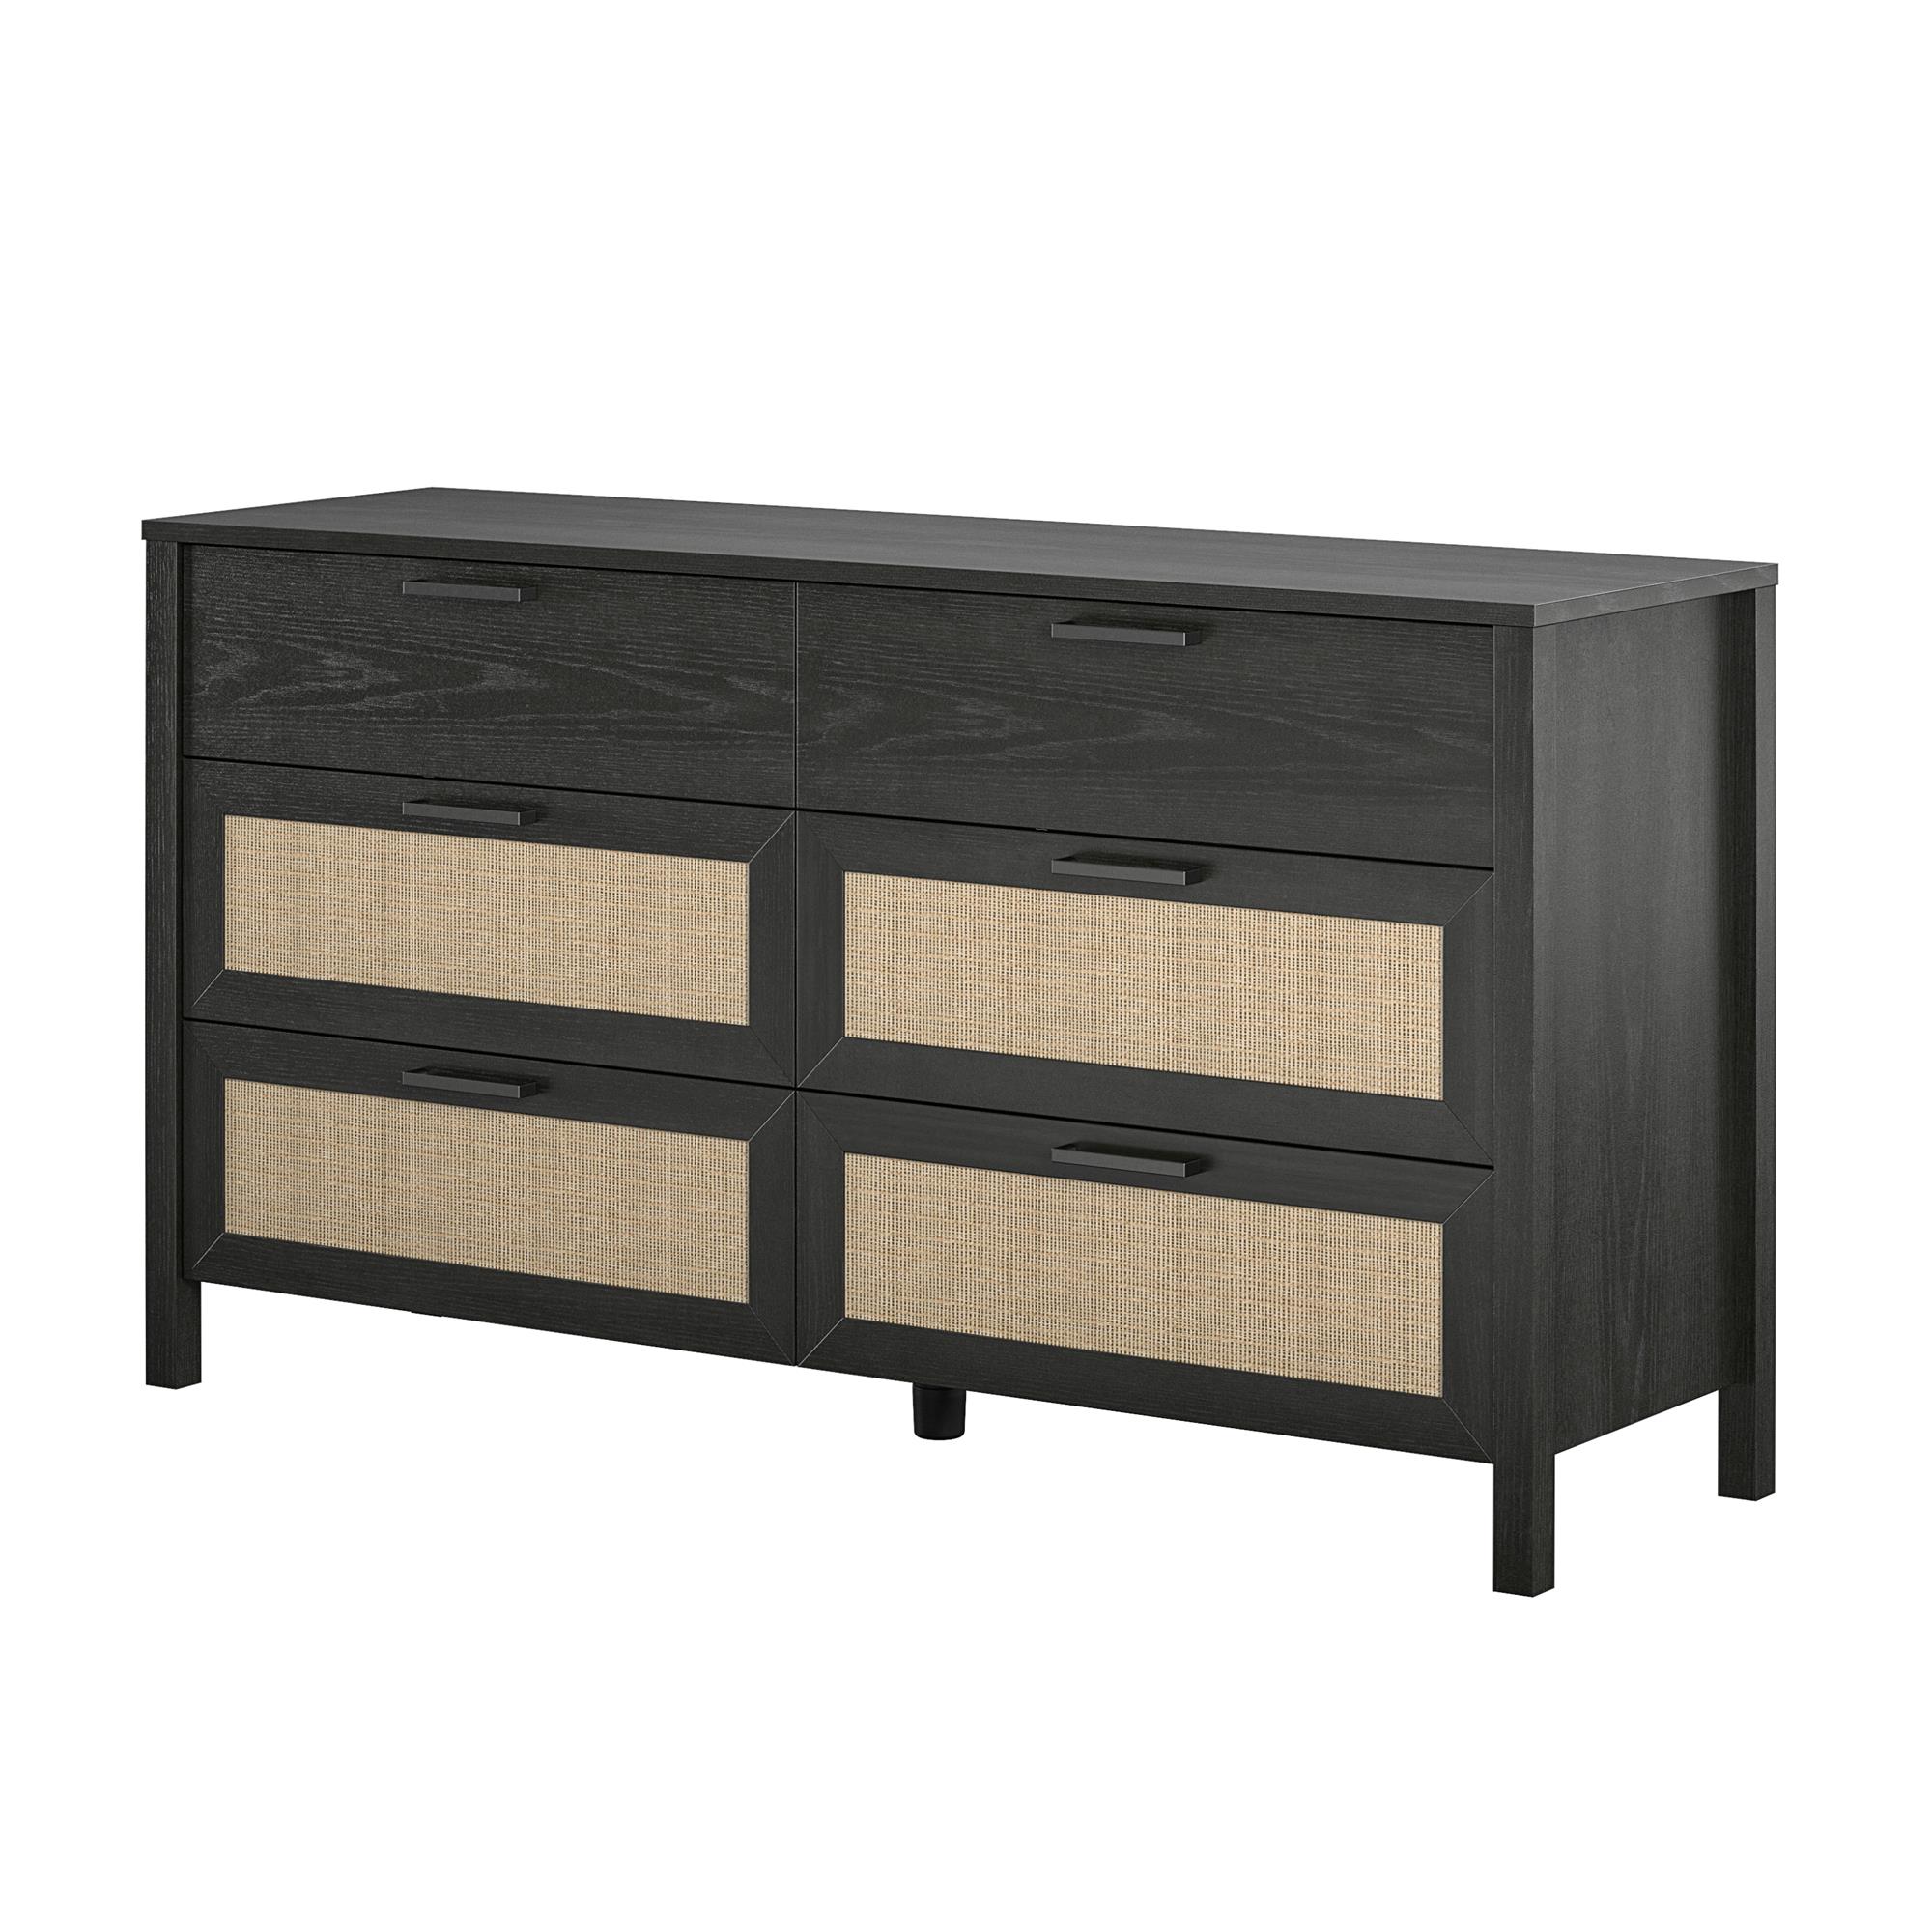 Ameriwood Home Wimberly 6-Drawer Dresser, Black Oak with Faux Rattan - image 5 of 16